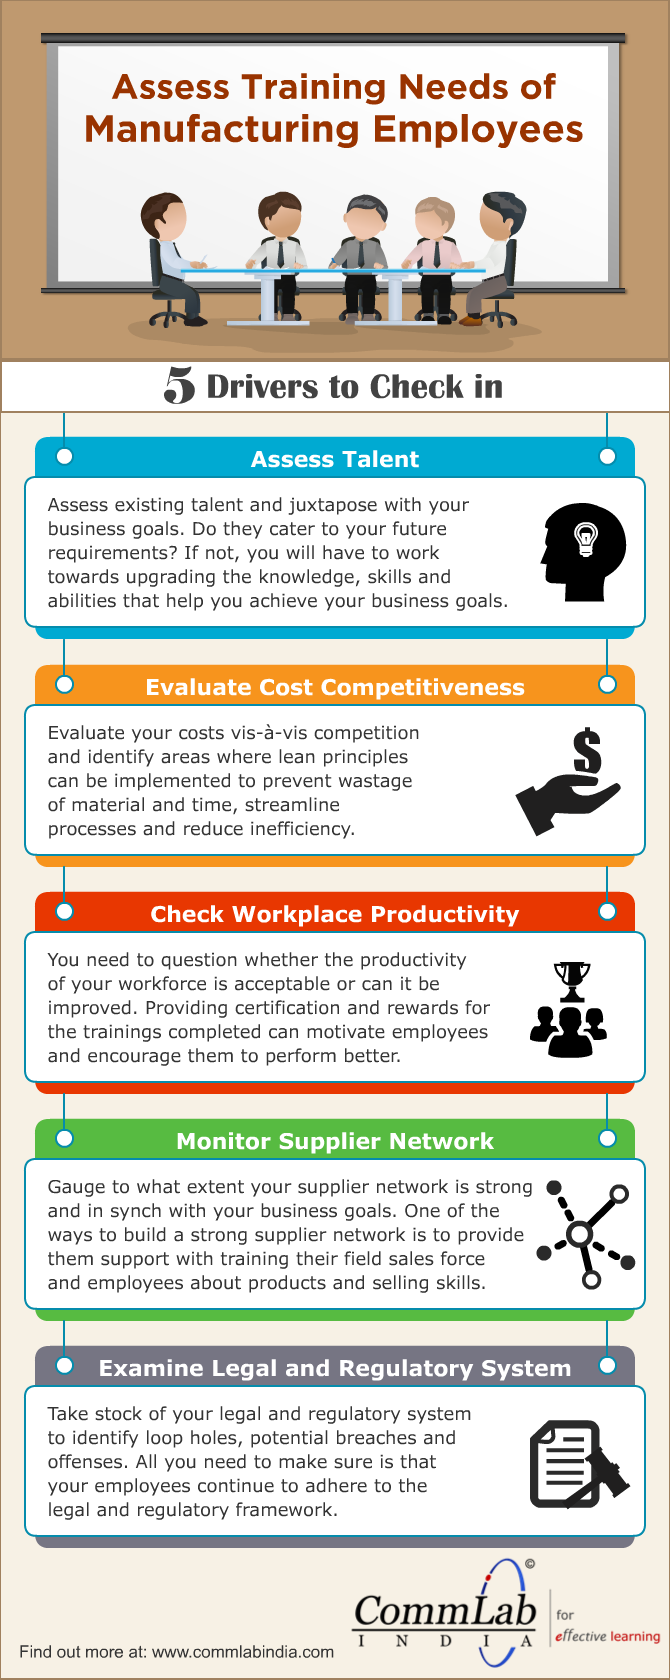 How to Assess Training Needs Of Manufacturing Employees [Infographic]